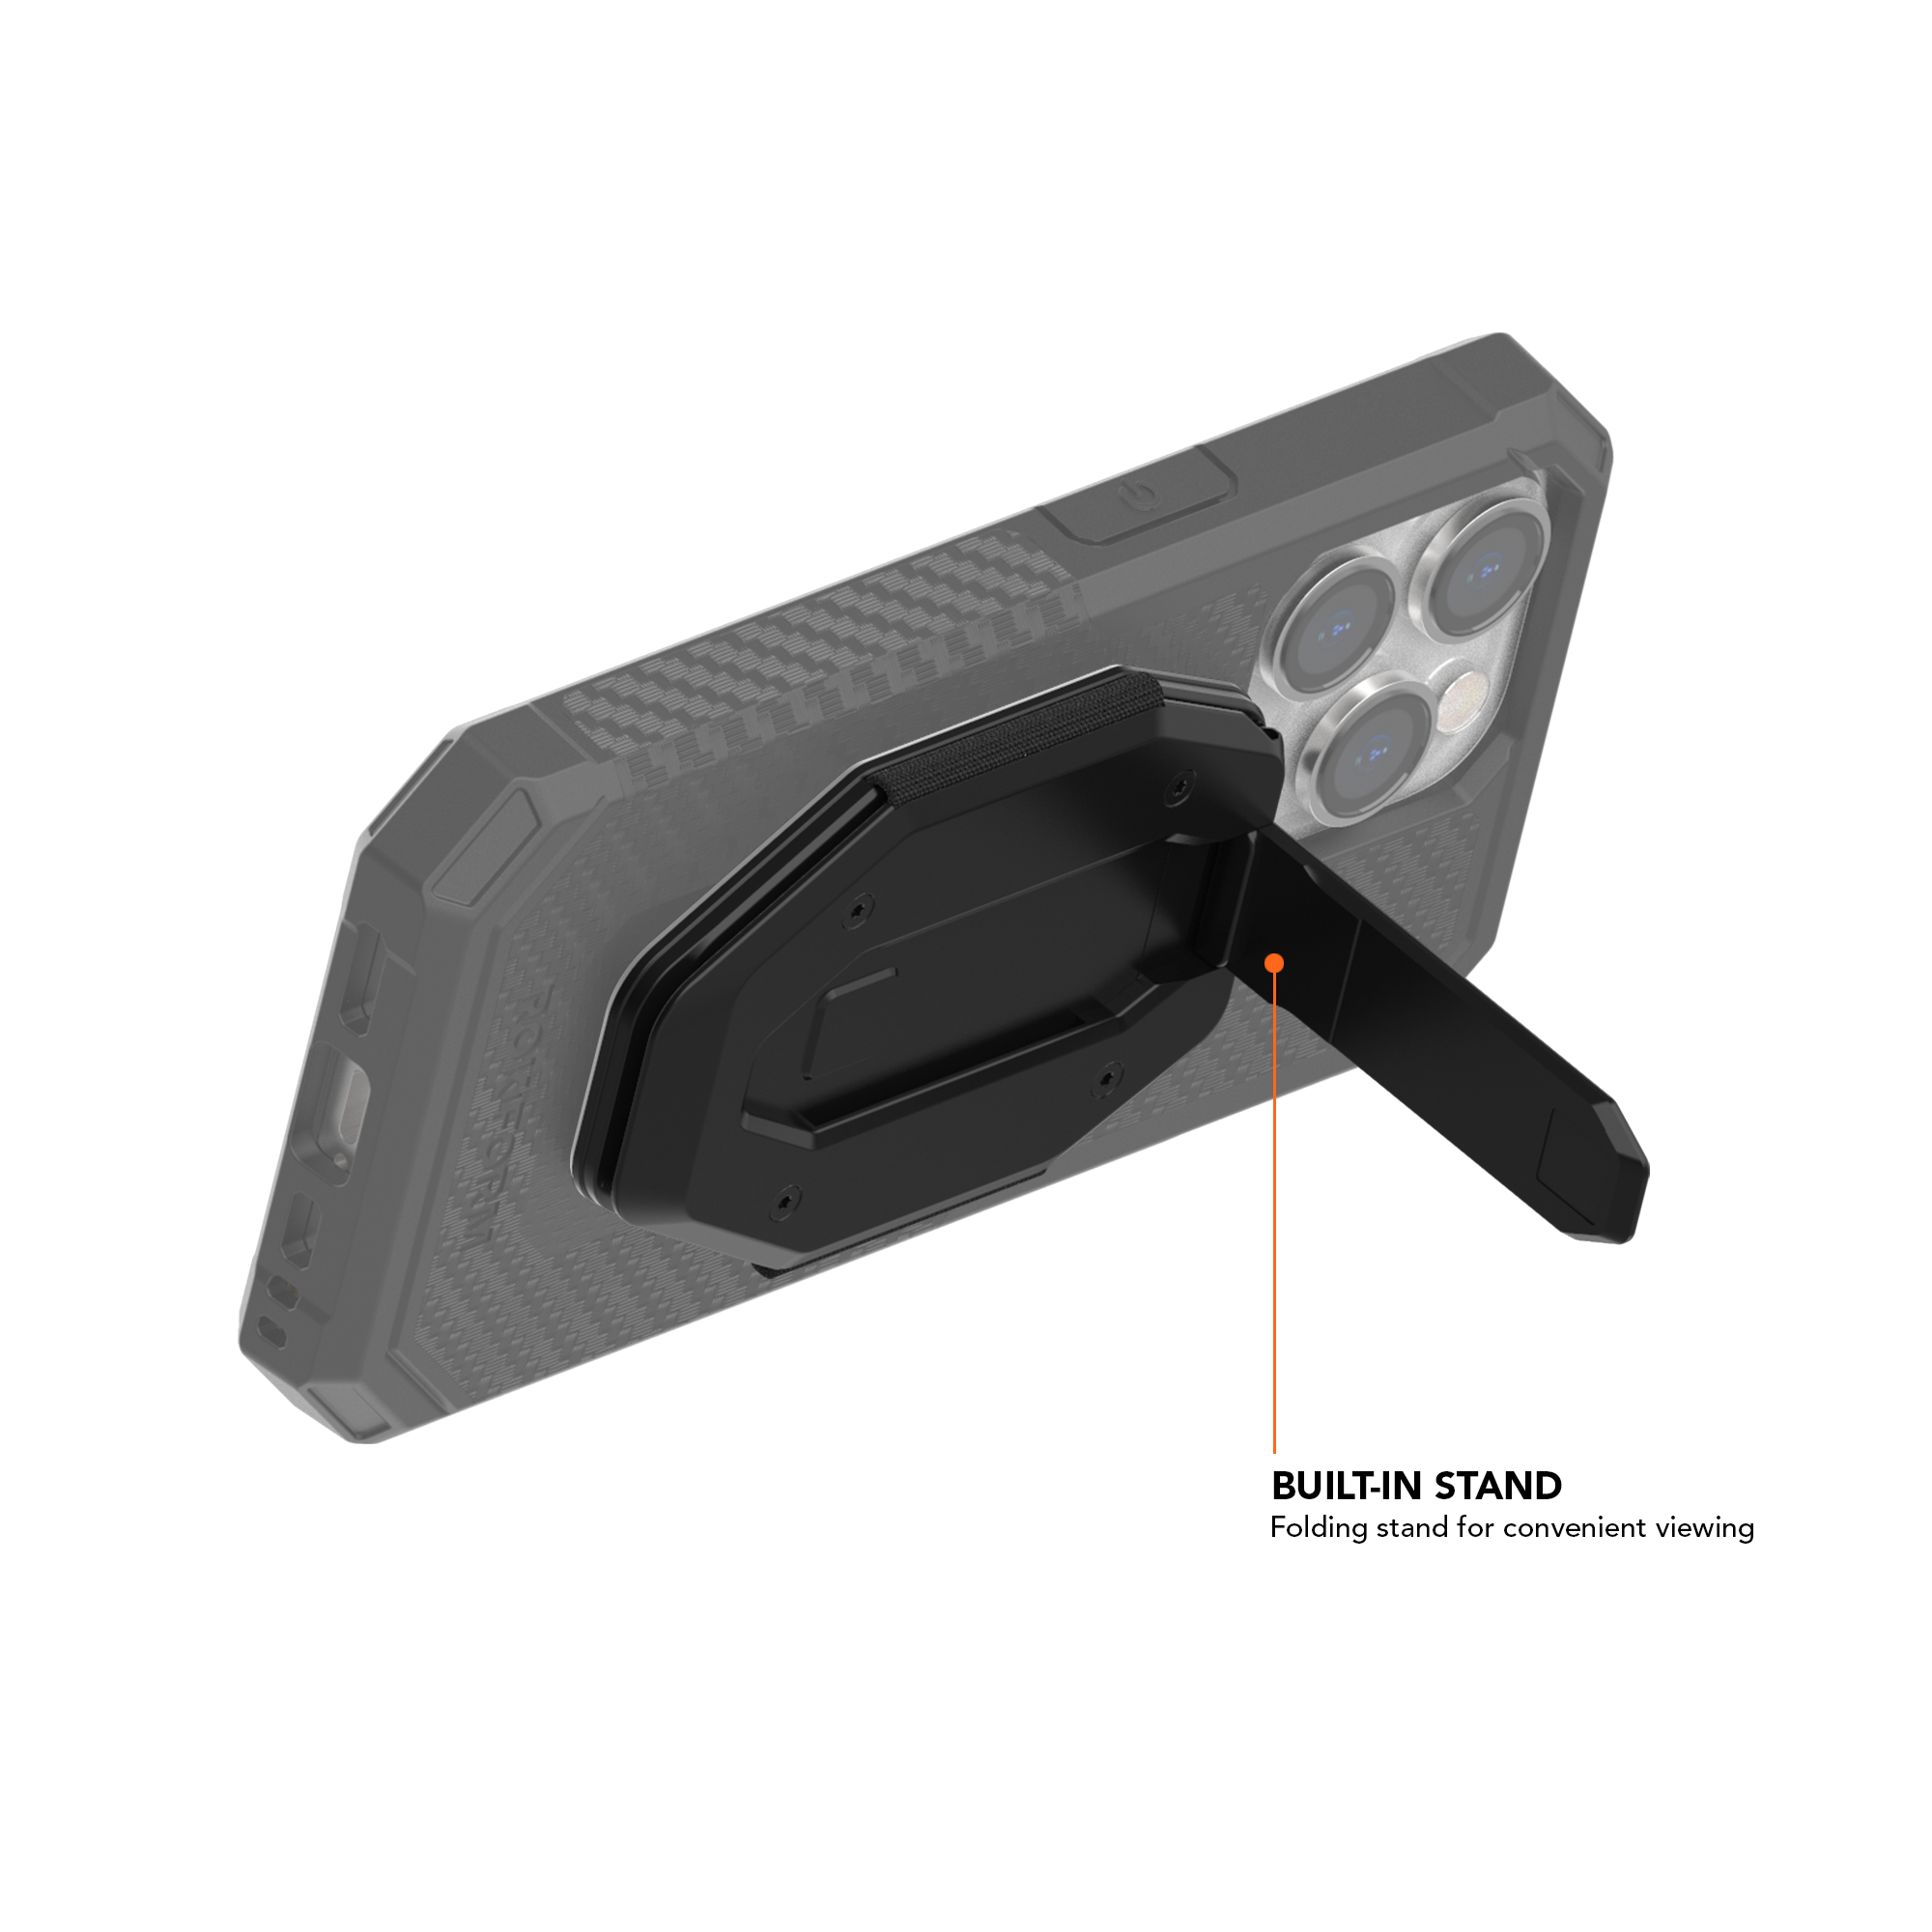 FUZION Magnetic MAGMAX™ Wallet with Stand